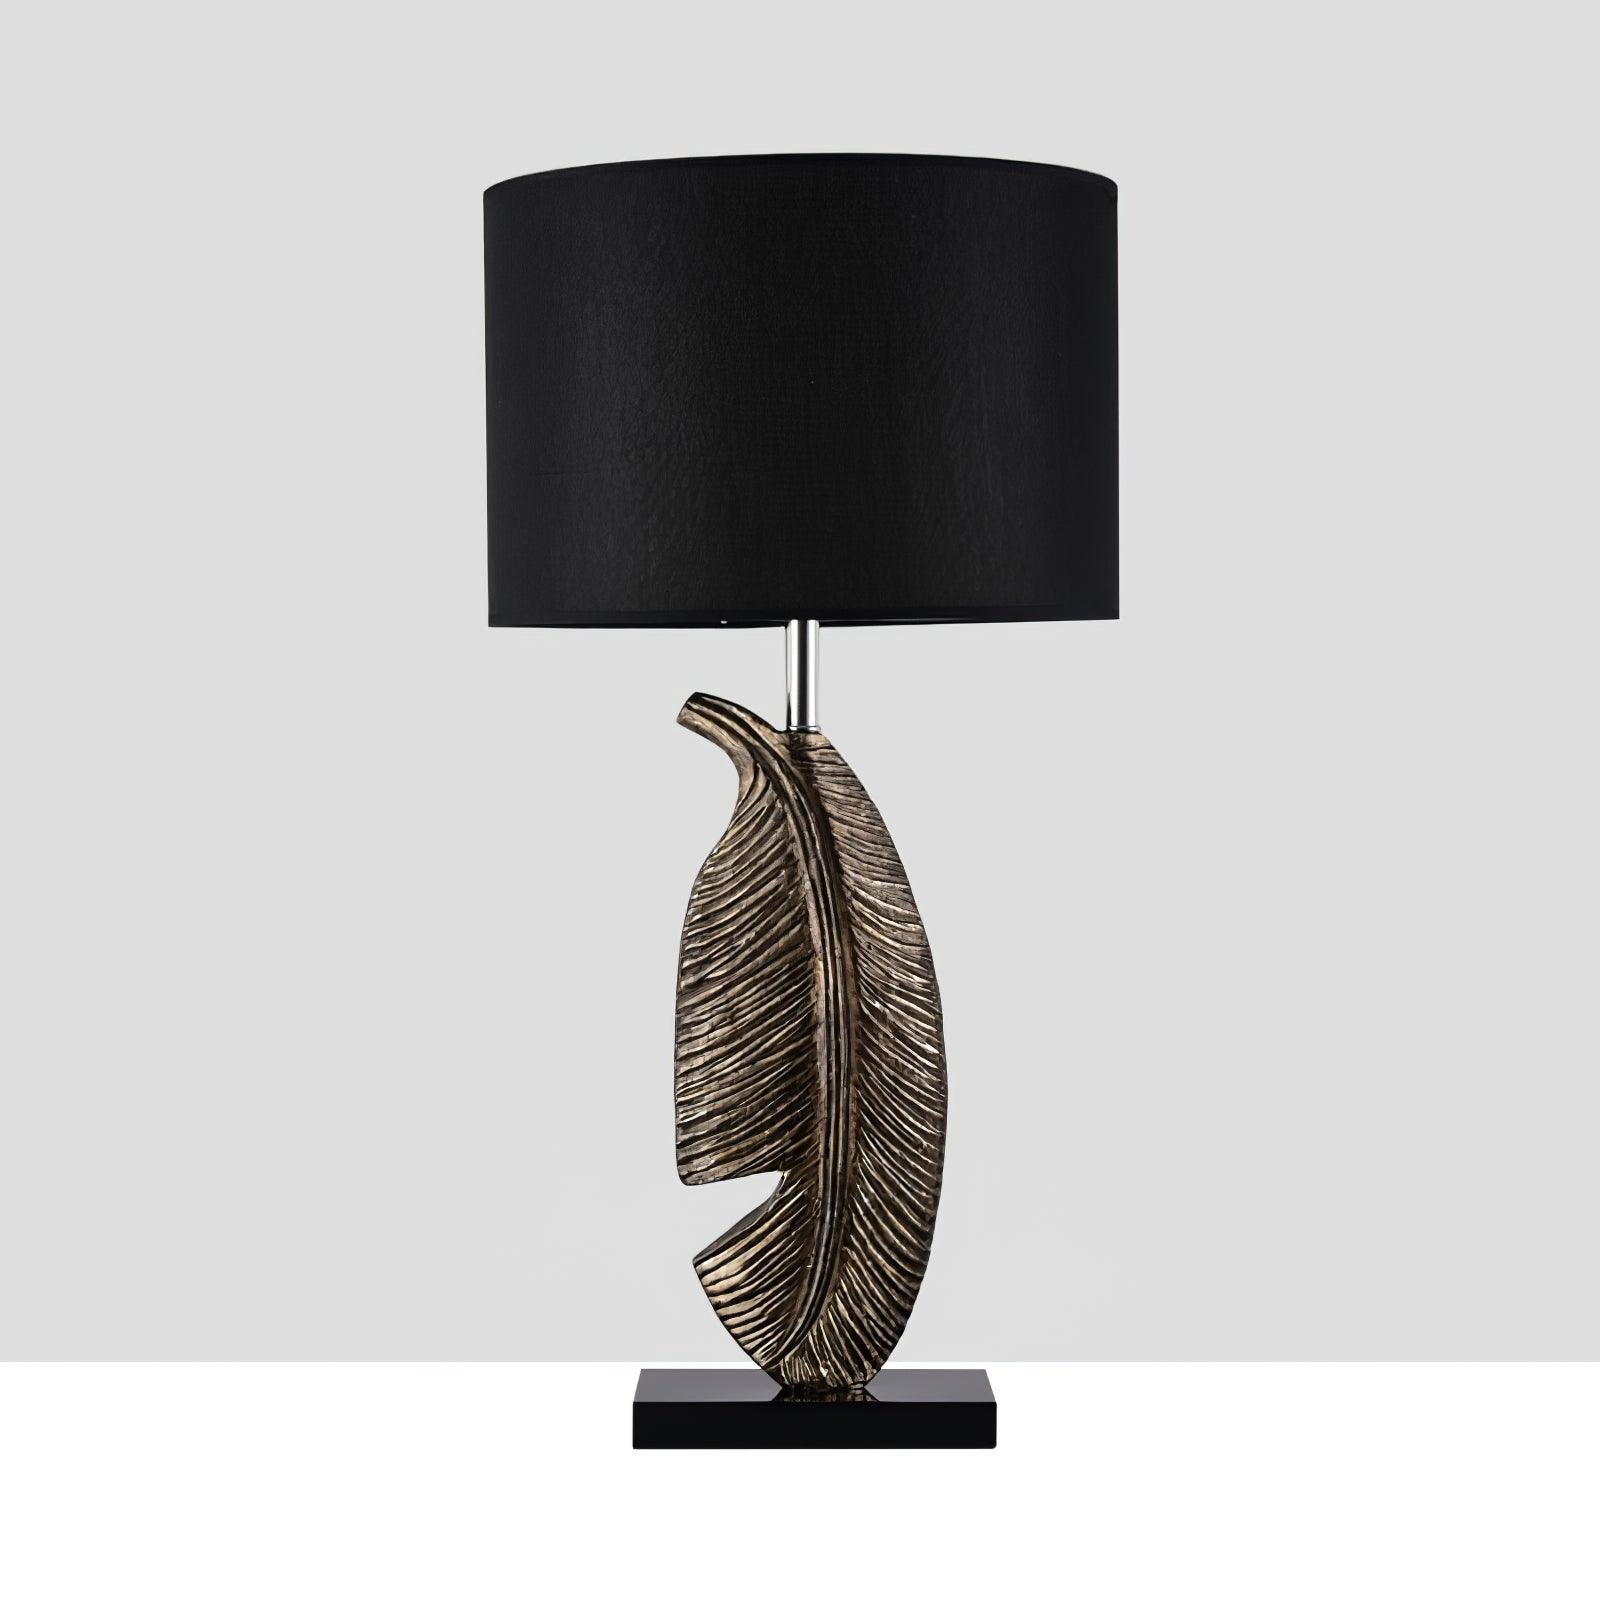 Black and Gold Cayo Table Lamp with EU Plug, measuring ∅ 14.1″ x H 25.5″ or Dia 36cm x H 65cm